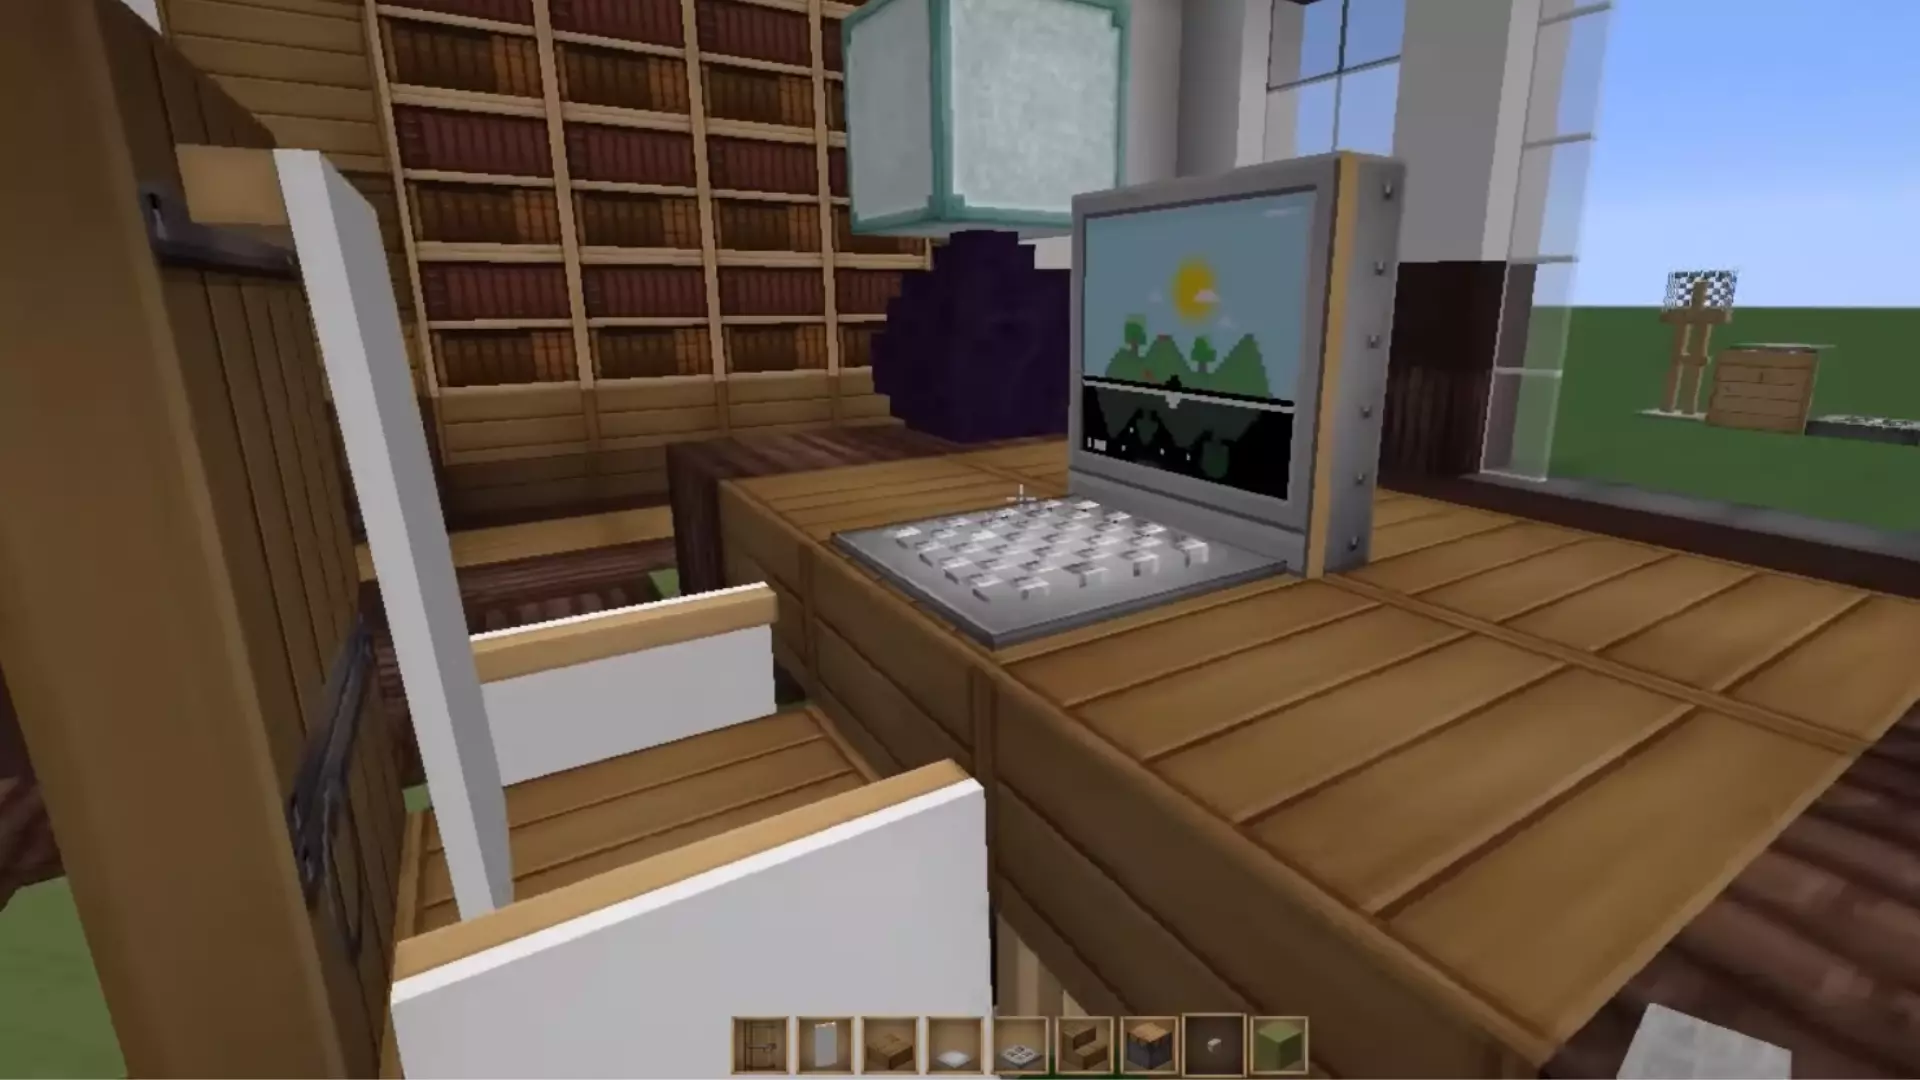 Size of Laptop in Minecraft